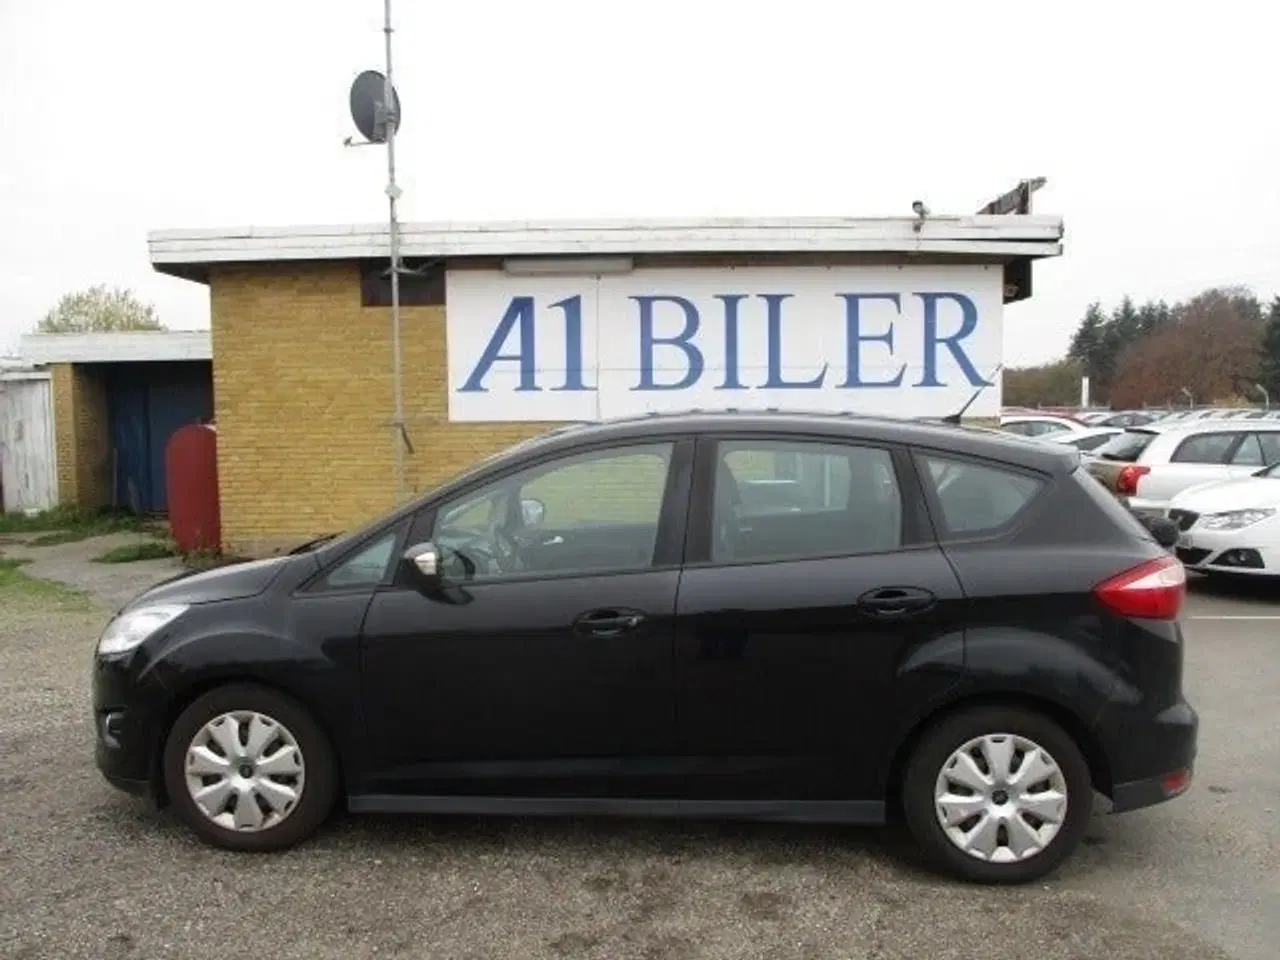 Billede 1 - Ford C-MAX 1,6 Ti-VCT 105 Trend